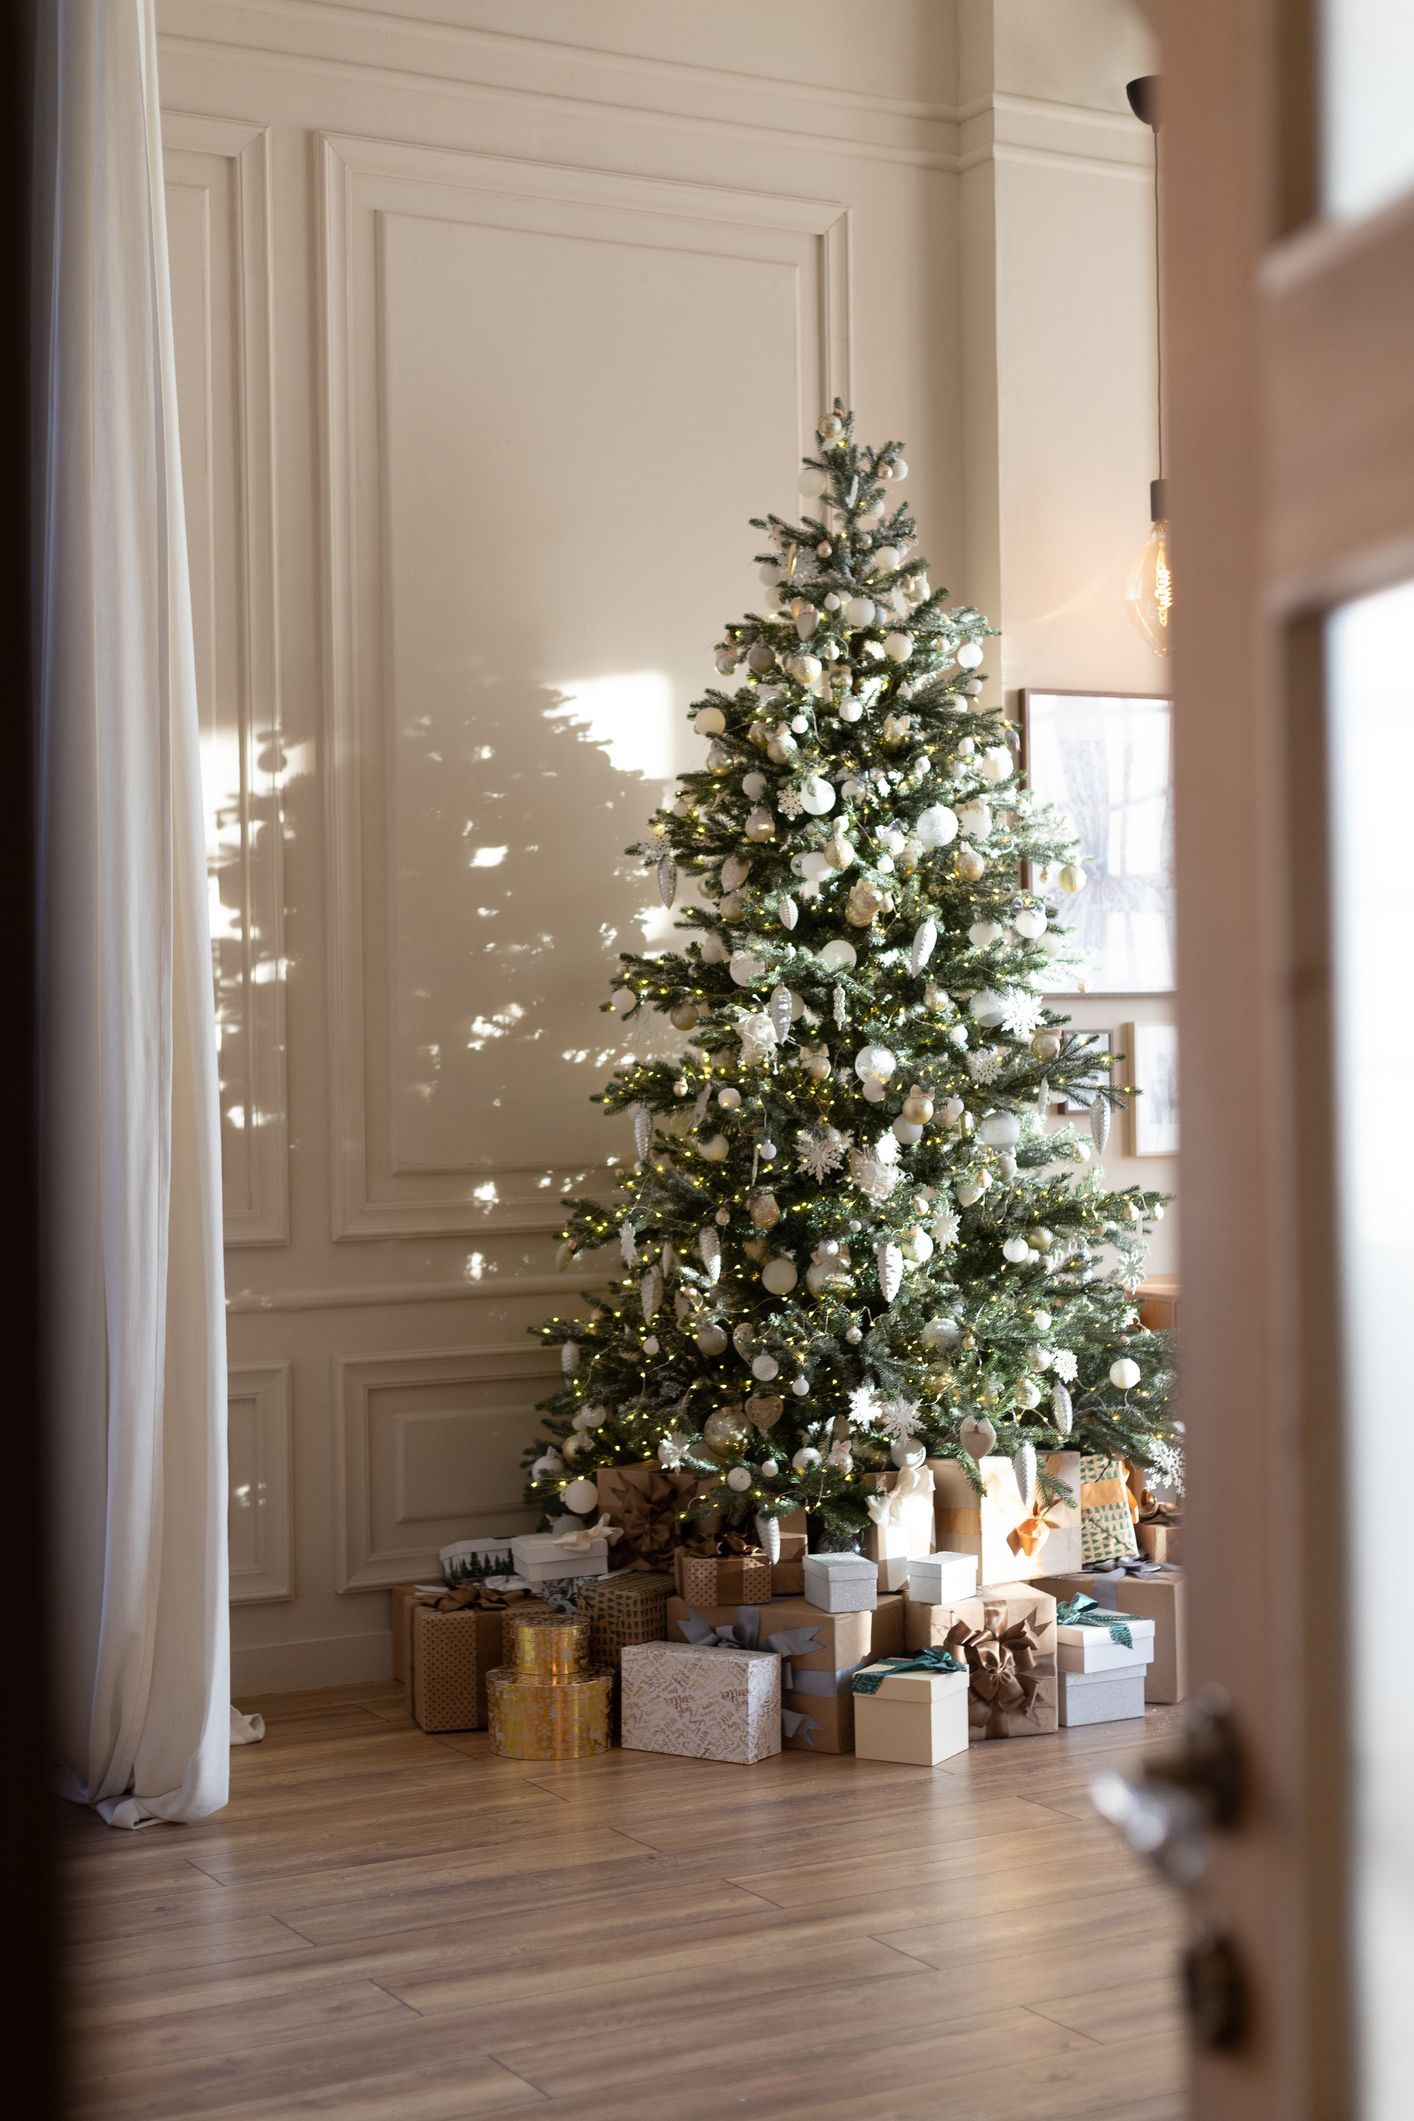 Presents Under Decorated Christmas Tree in Den | Creative christmas trees, Christmas  tree themes, Cool christmas trees